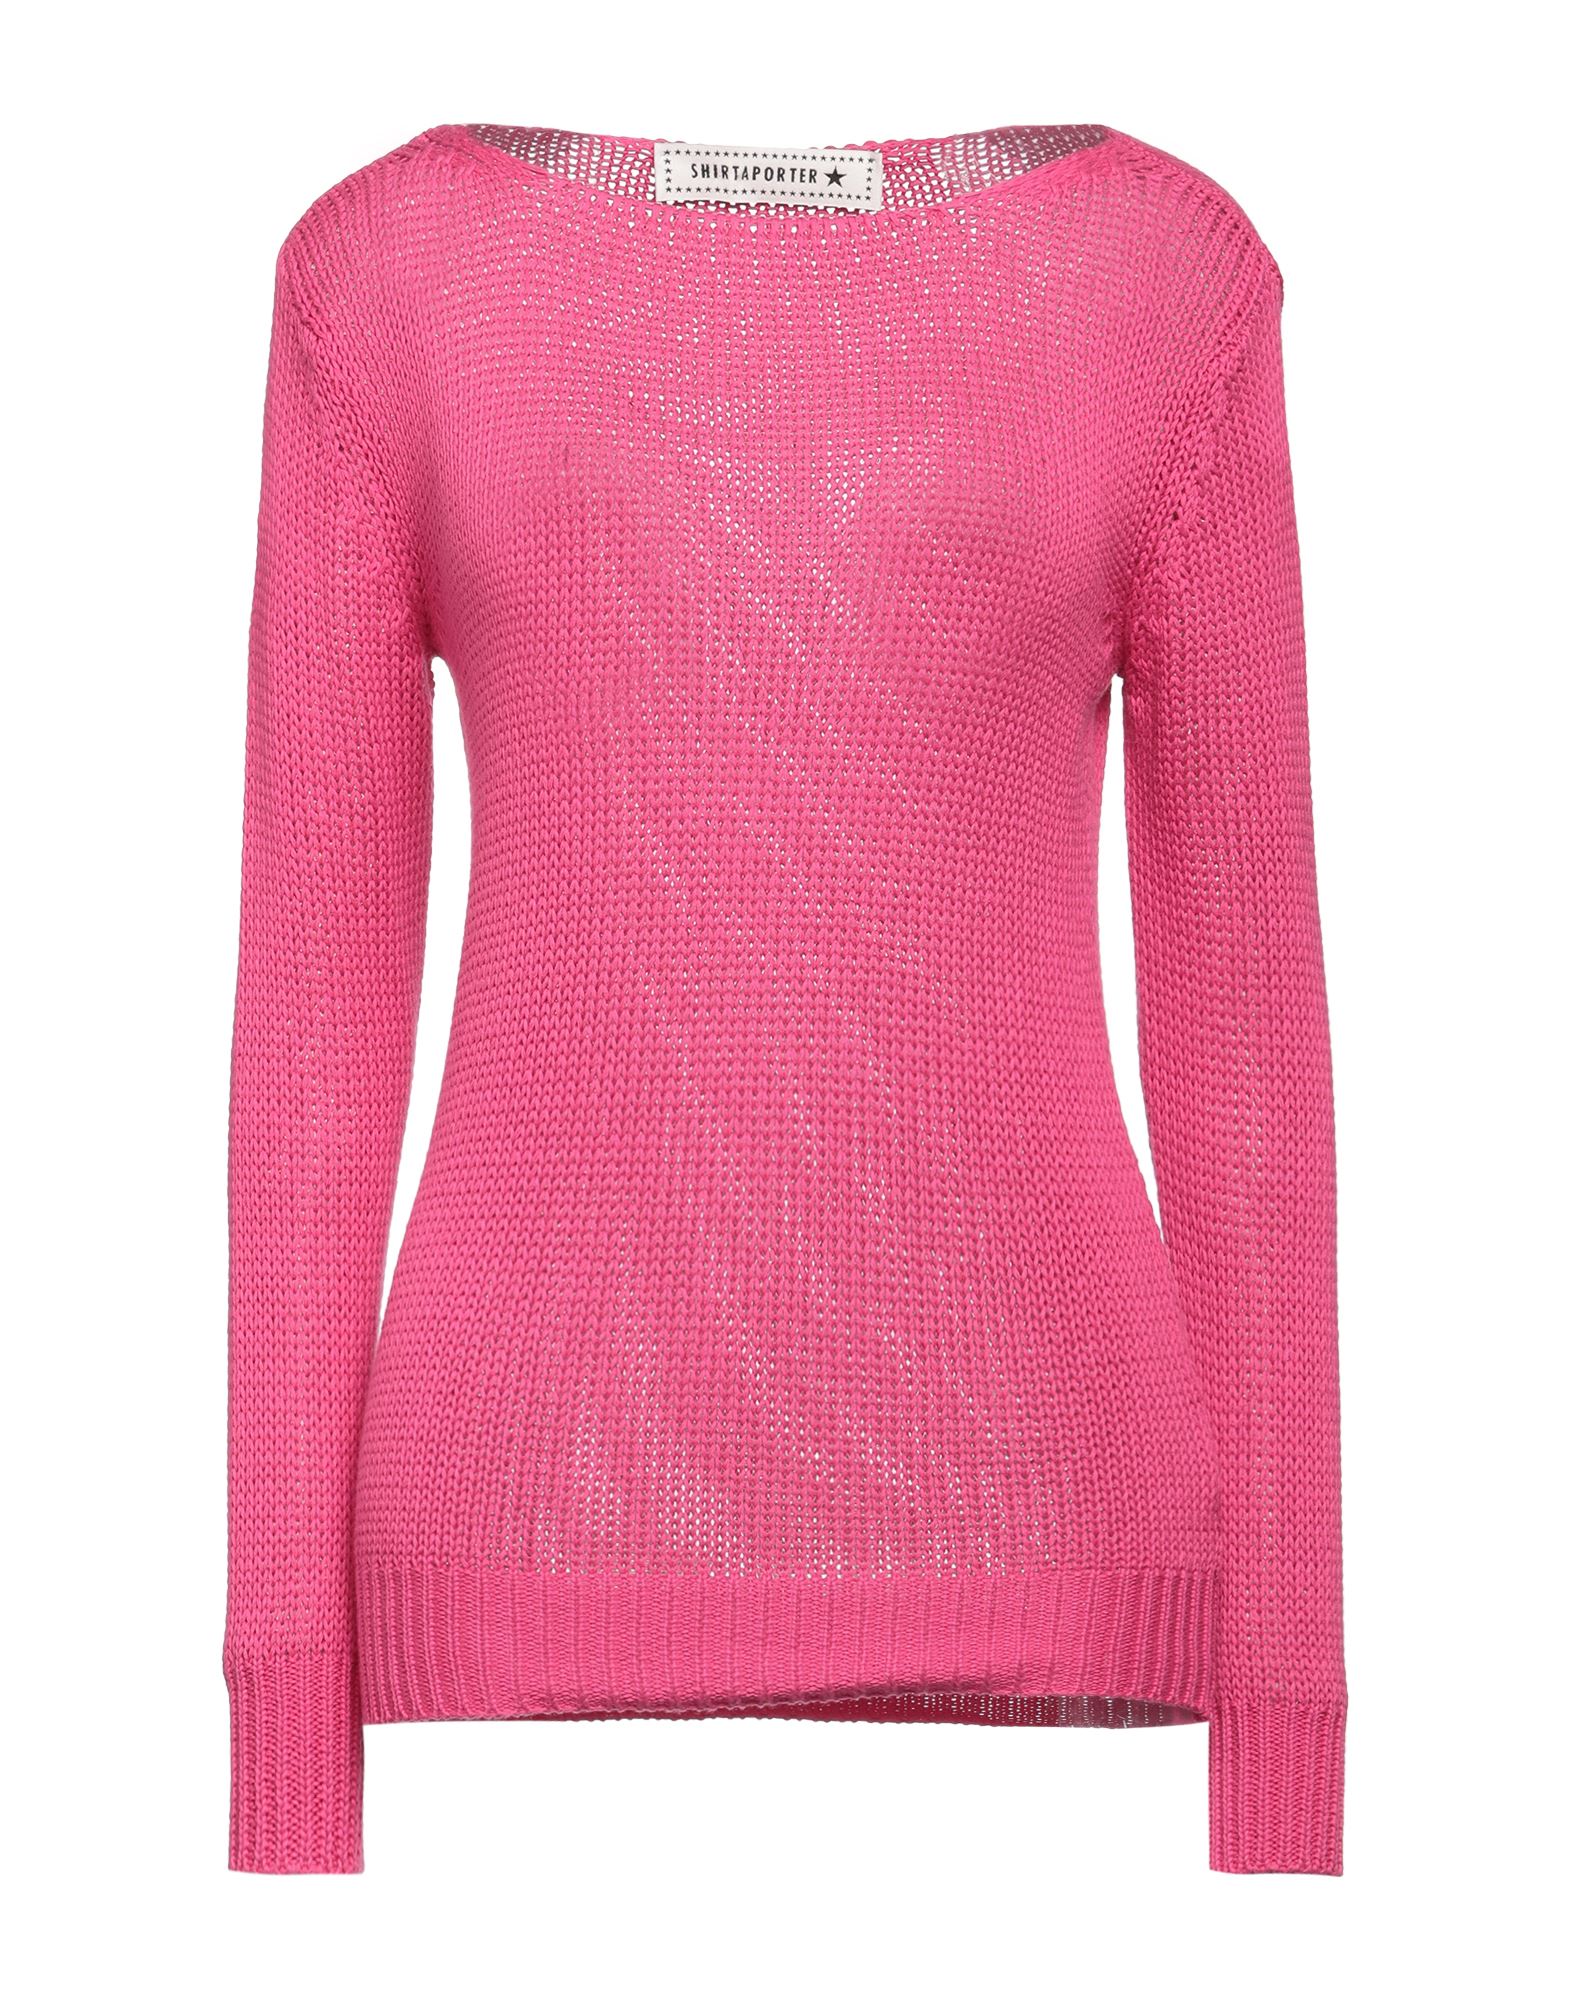 Shirtaporter Sweaters In Pink